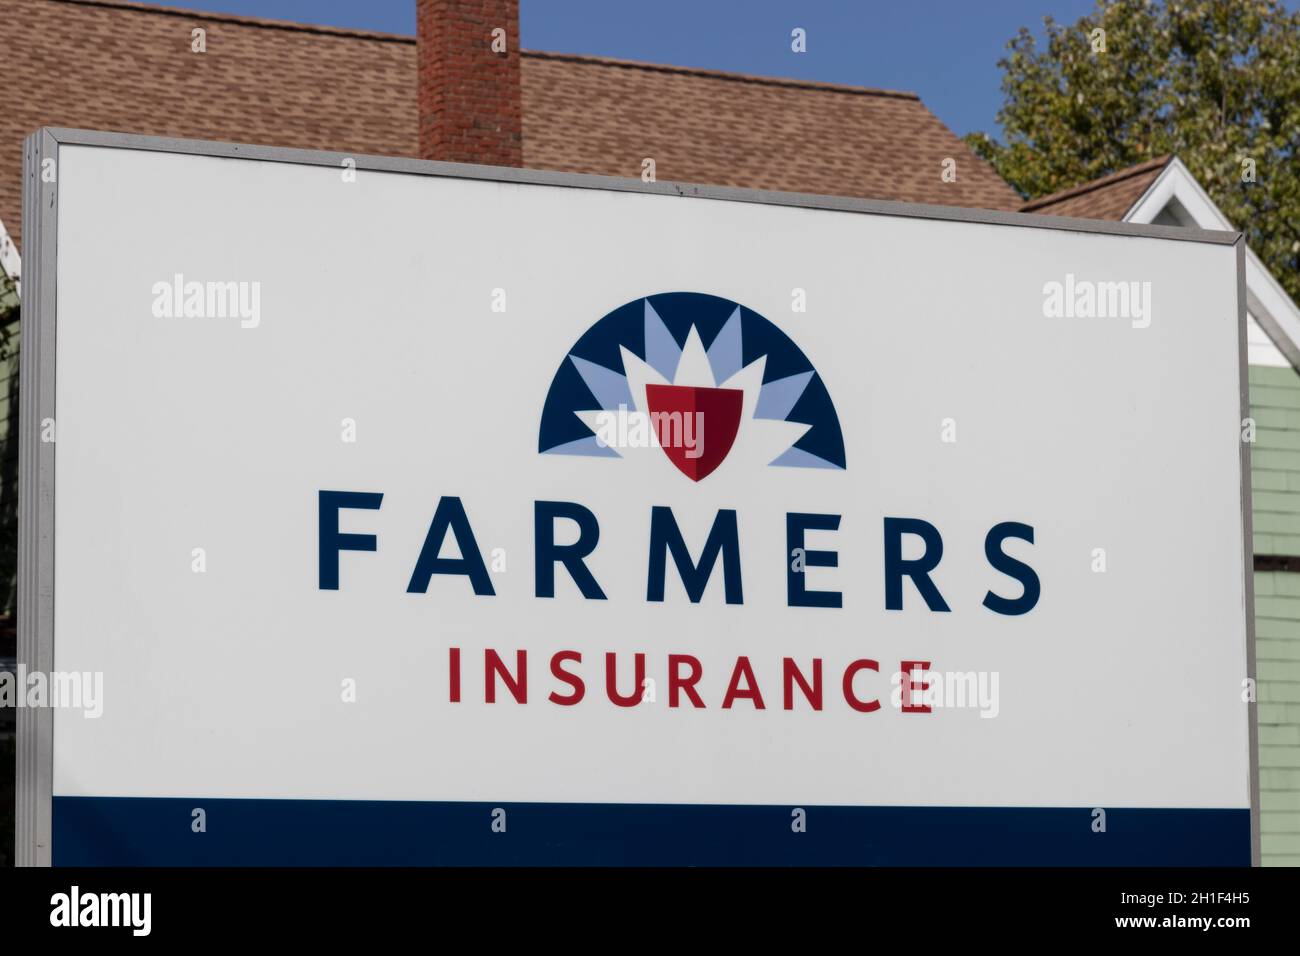 farmers life insurance images